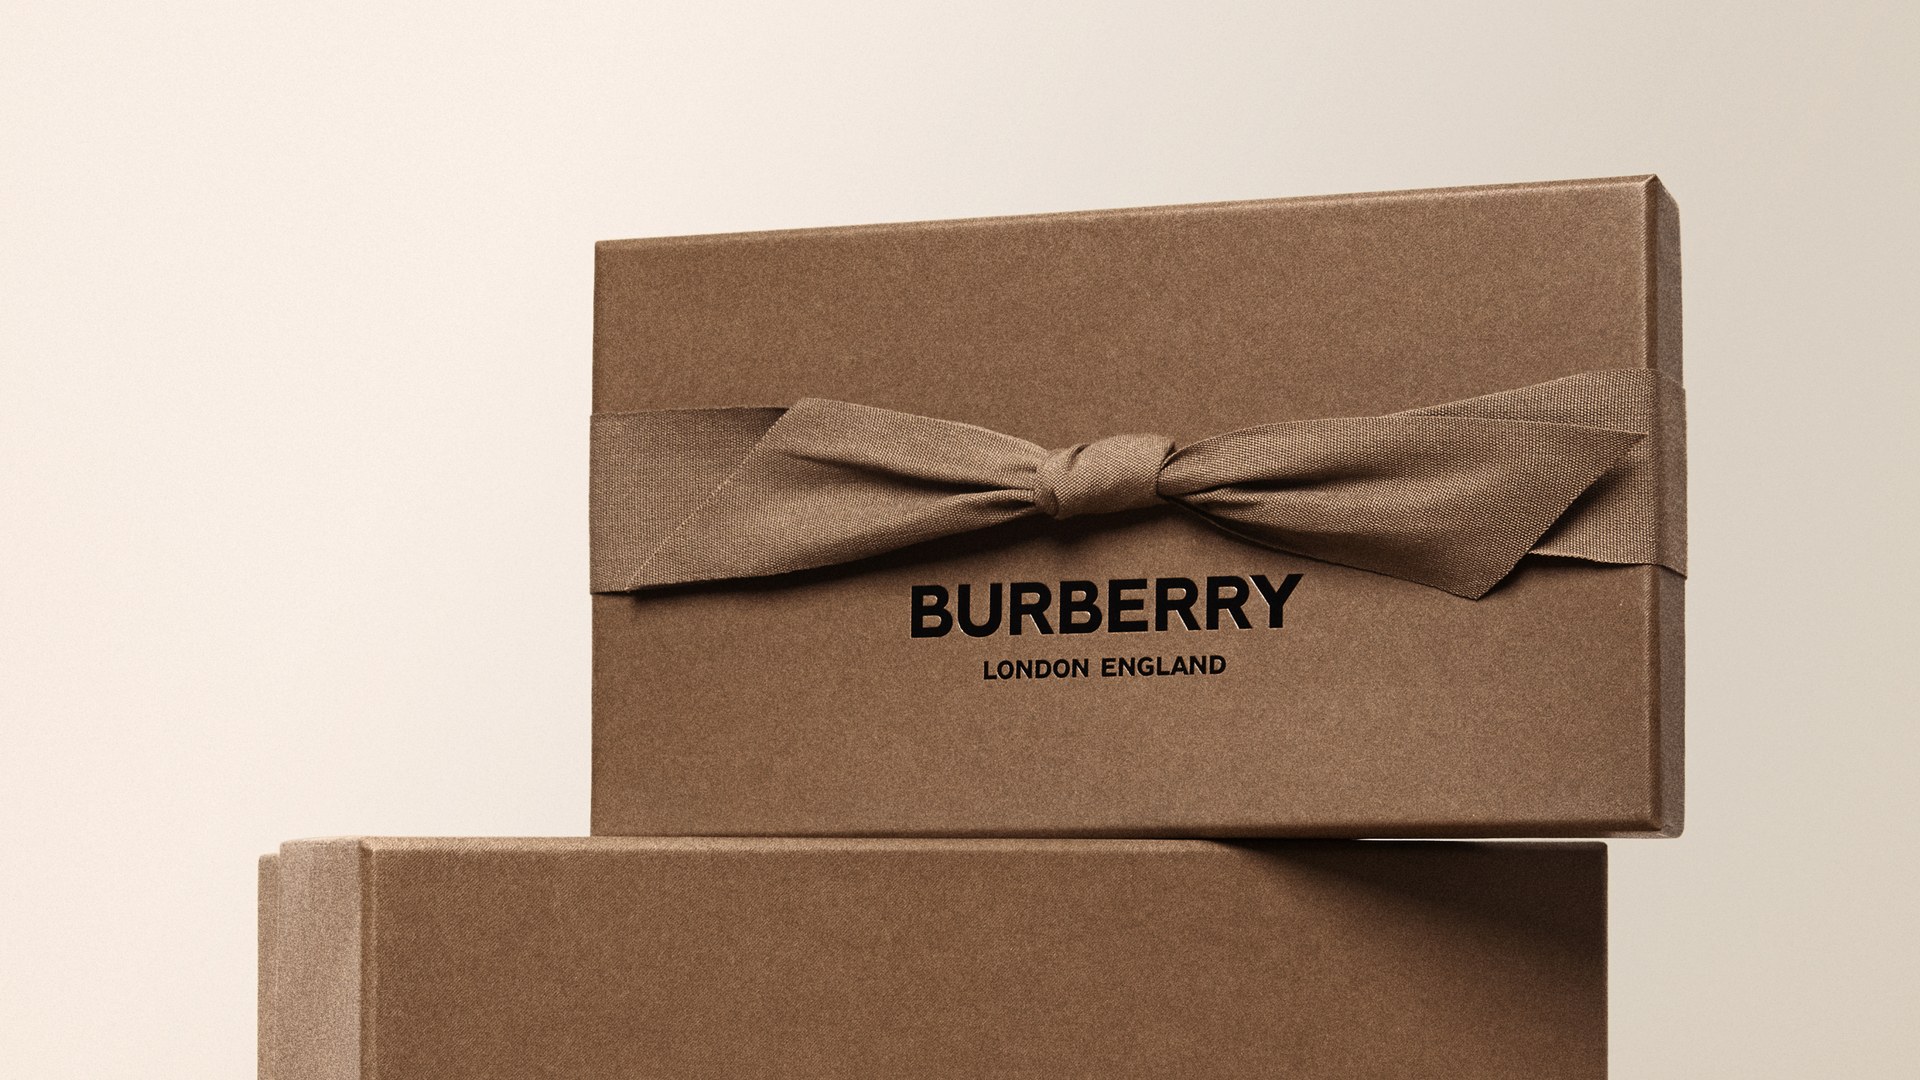 Eco friendly luxury packaging from Burberry London